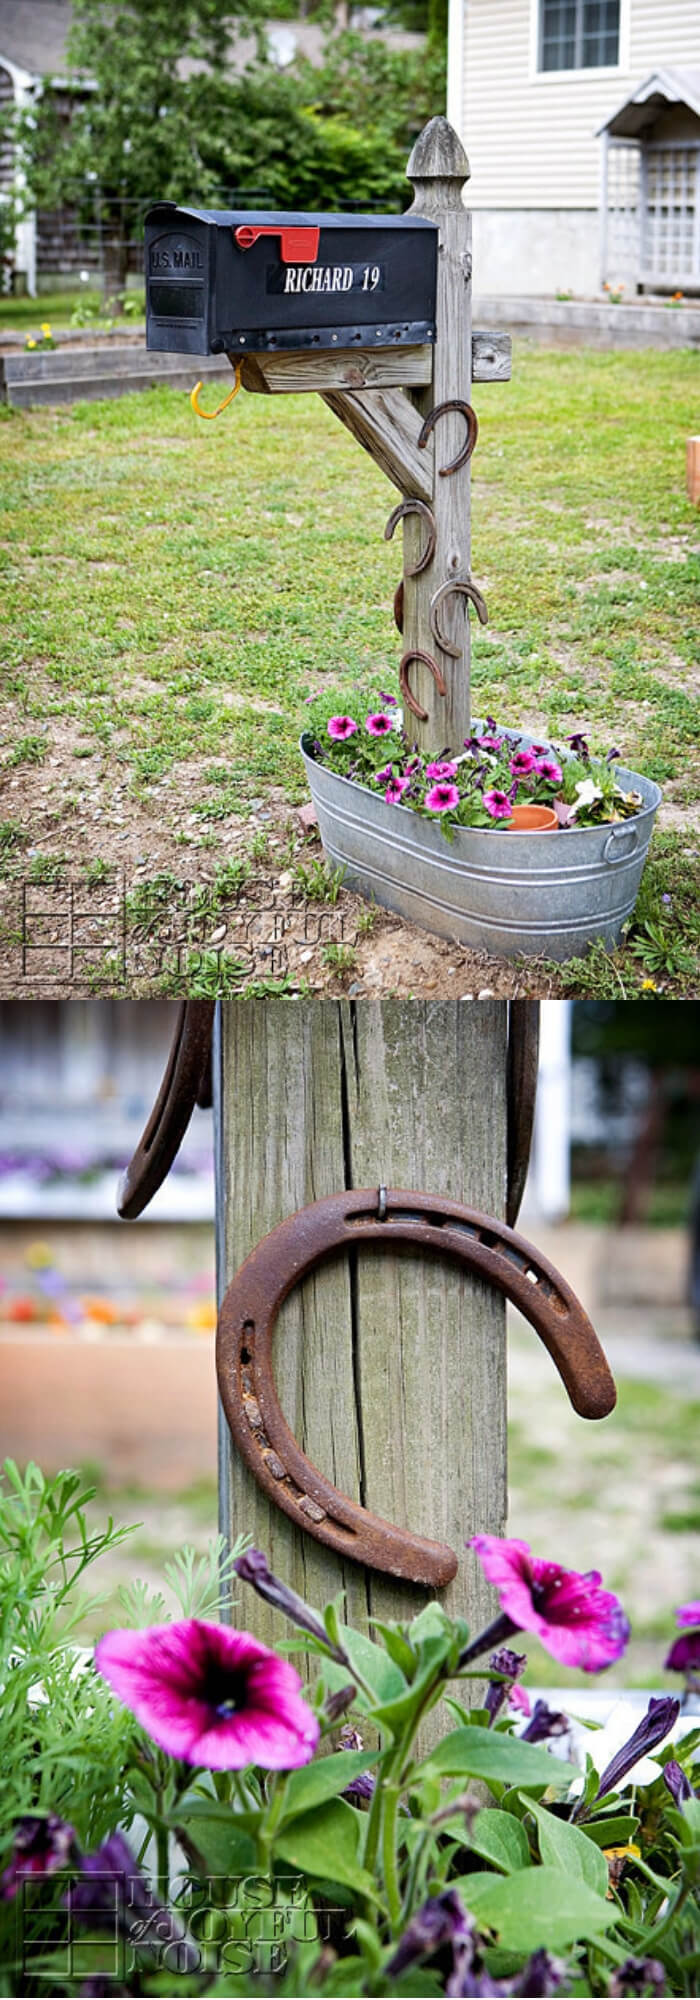 Mailbox from horse shoes | Best Mailbox Landscaping Ideas